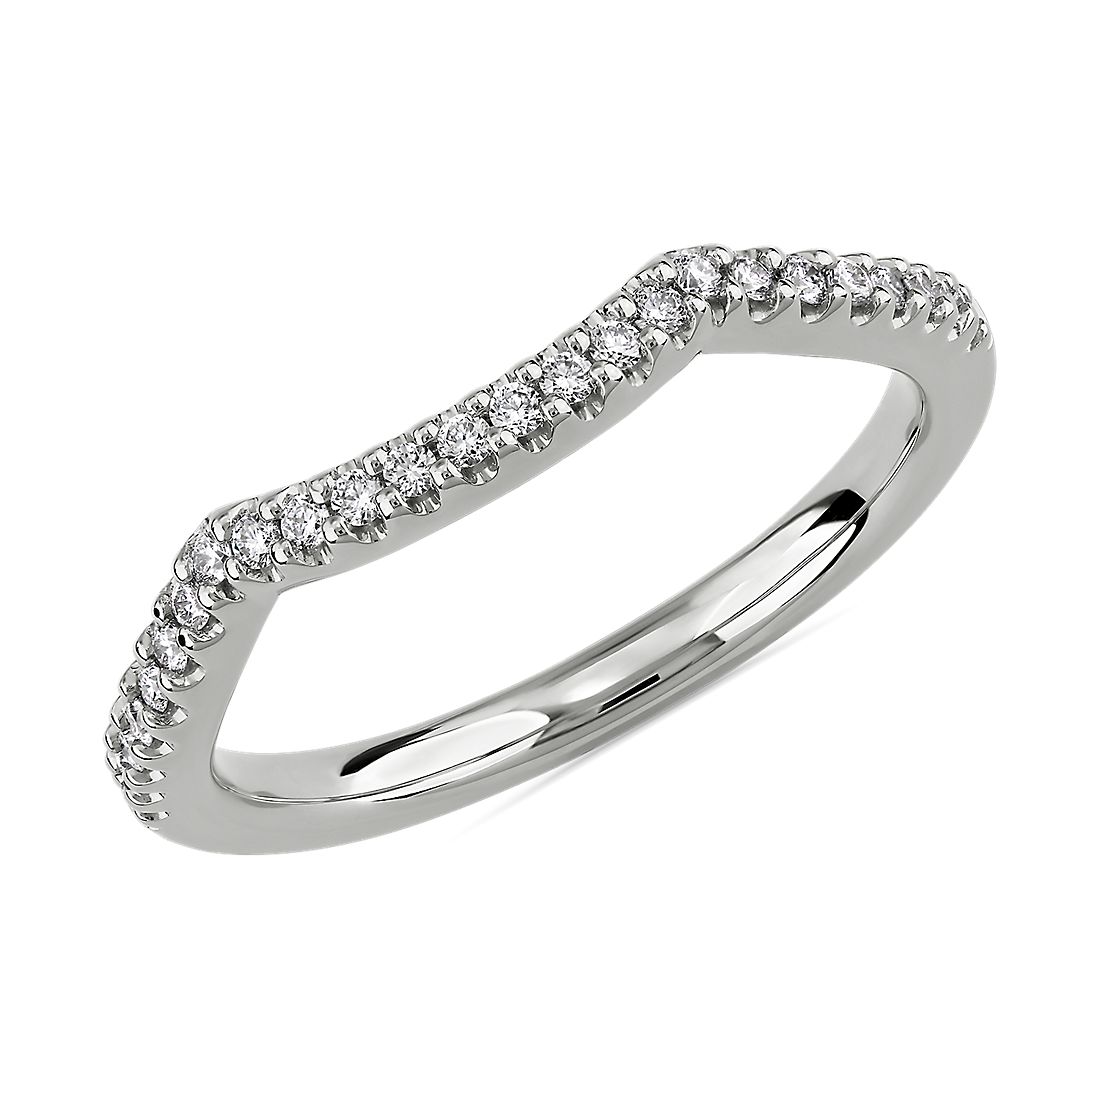 Twisted Double Chevron Wedding Ring in 14k White Gold (1/6